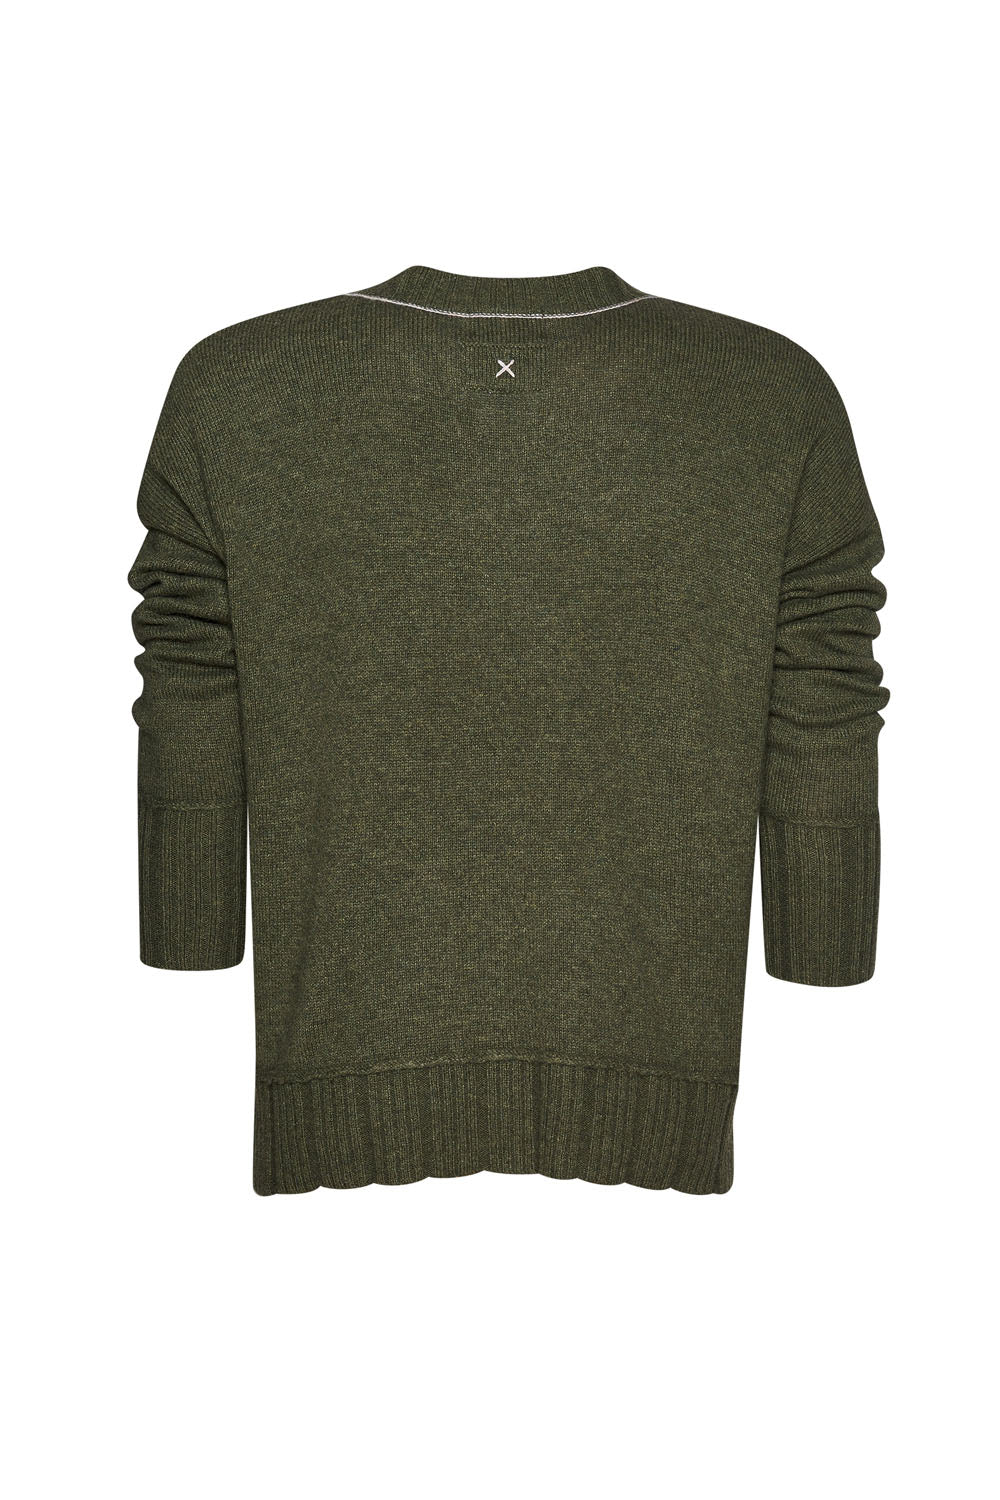 MADLY SWEETLY GIRLS CLUB SWEATER - OLIVE - THE VOGUE STORE